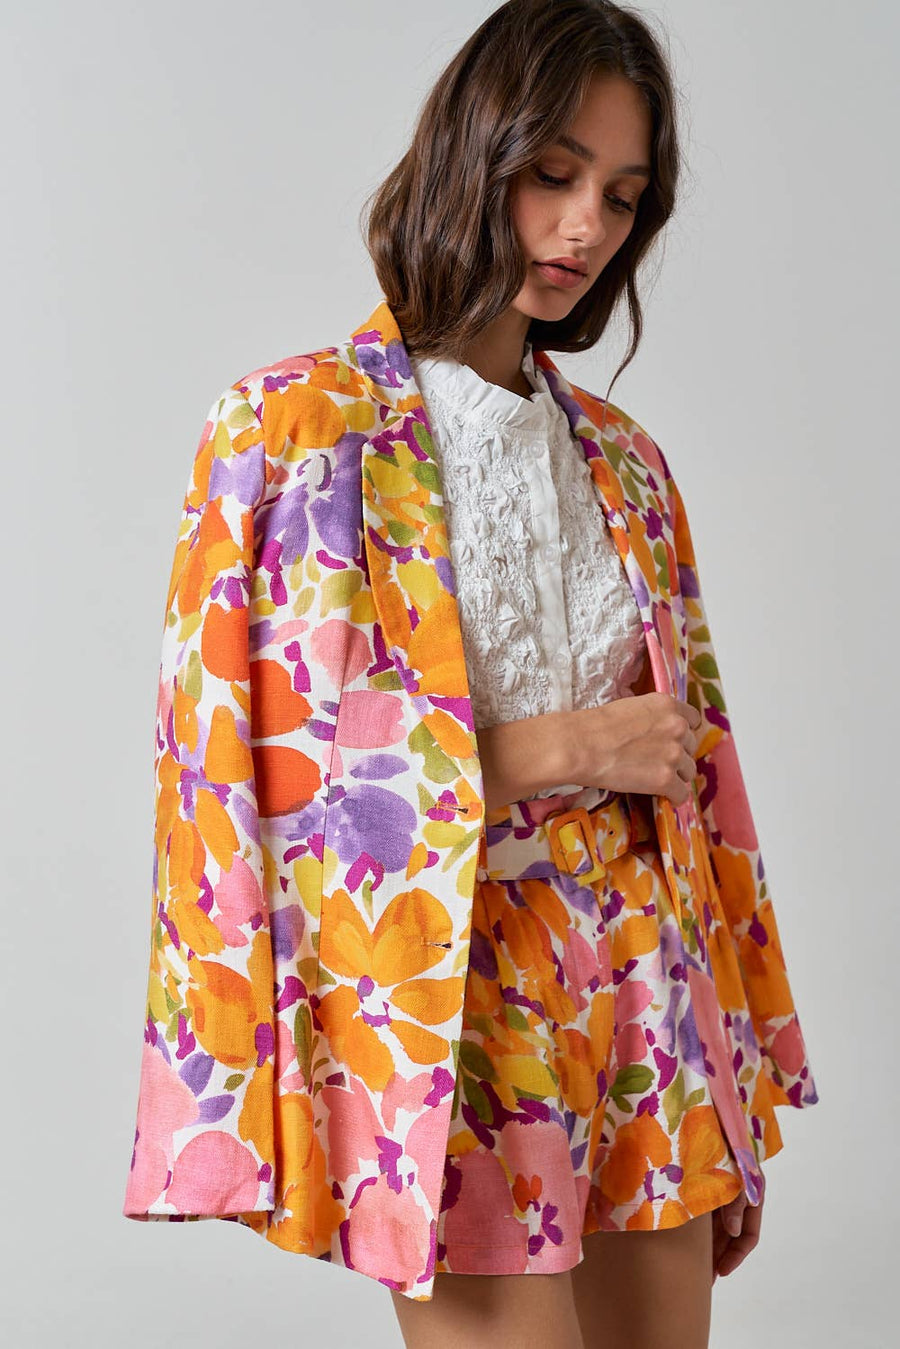 Floral Print Jacket by Lalavon